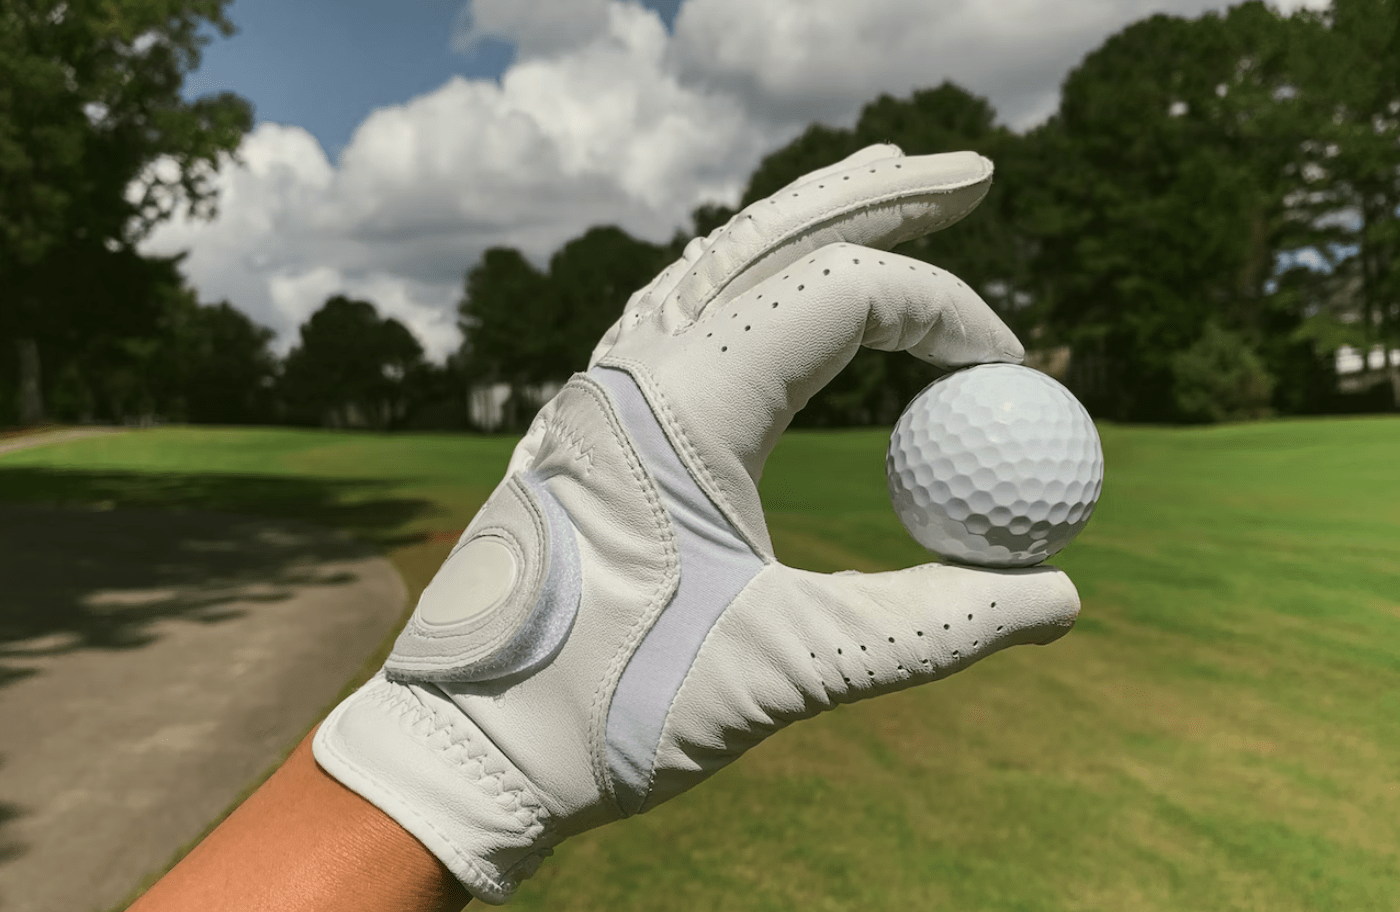 Common Golf Injuries